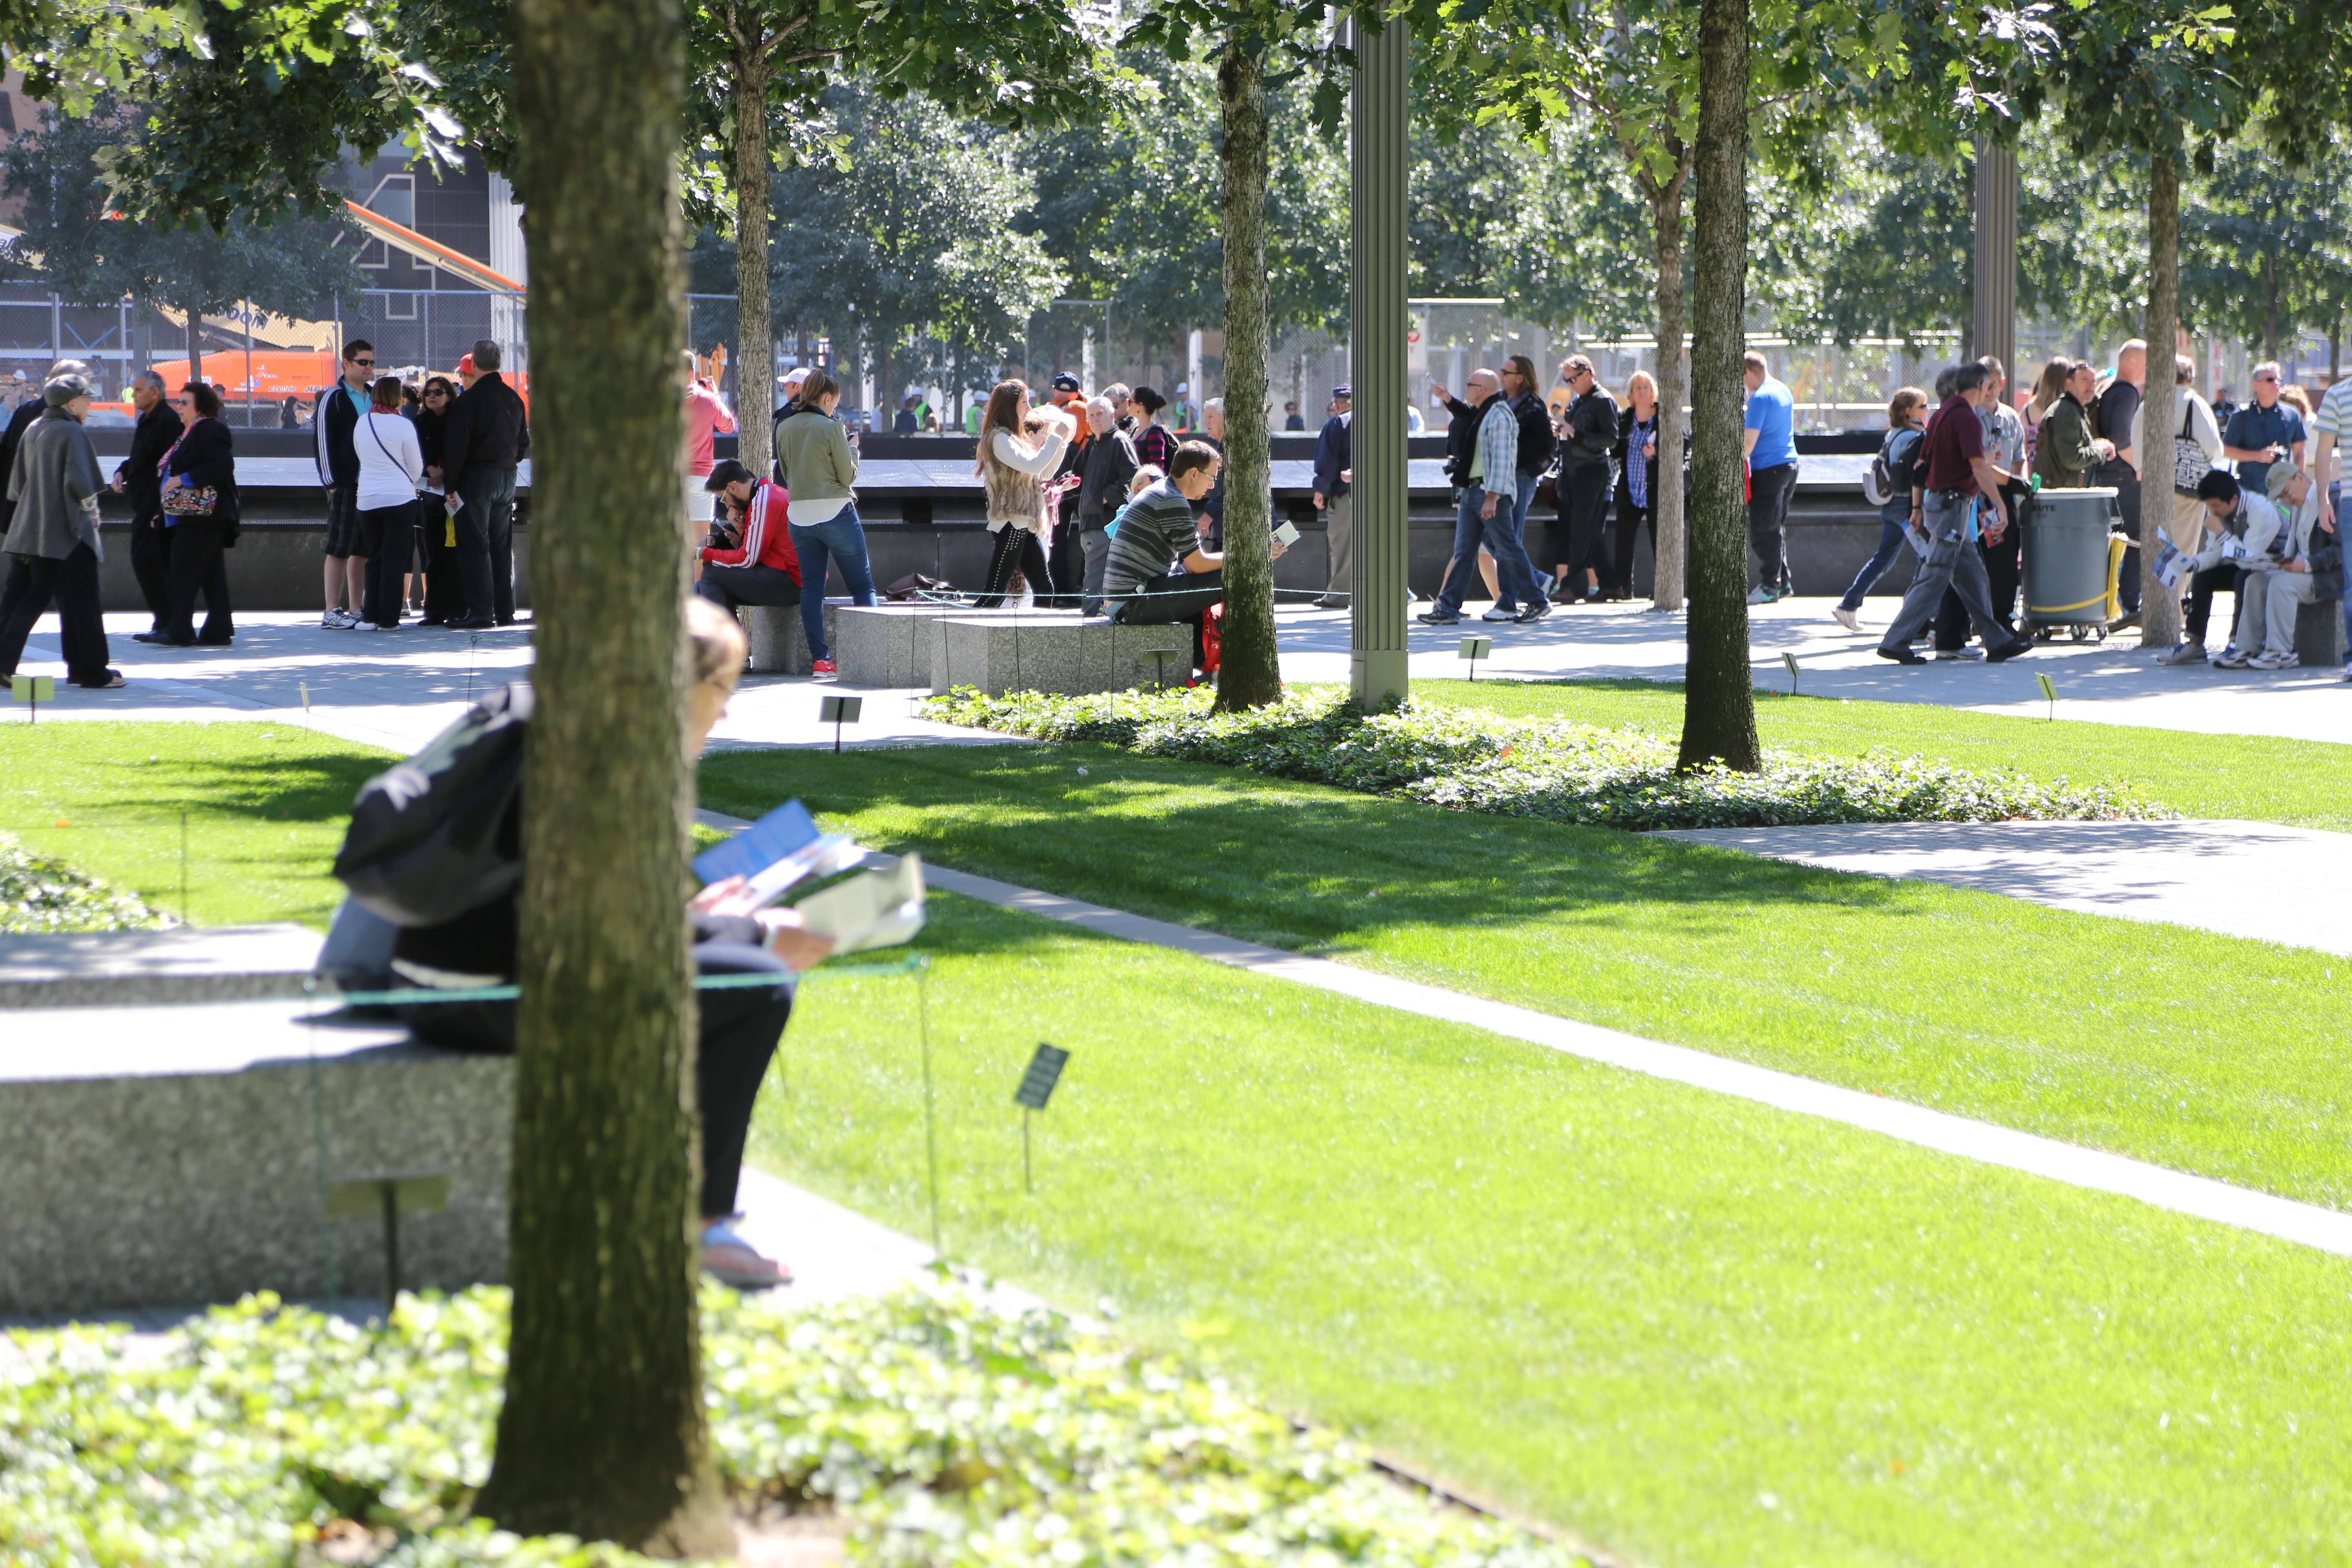 Visitors sit on benches and walk around the 9/11 Memorial plaza on a sunny day. In the foreground a woman sits under a tree reading a pamphlet.